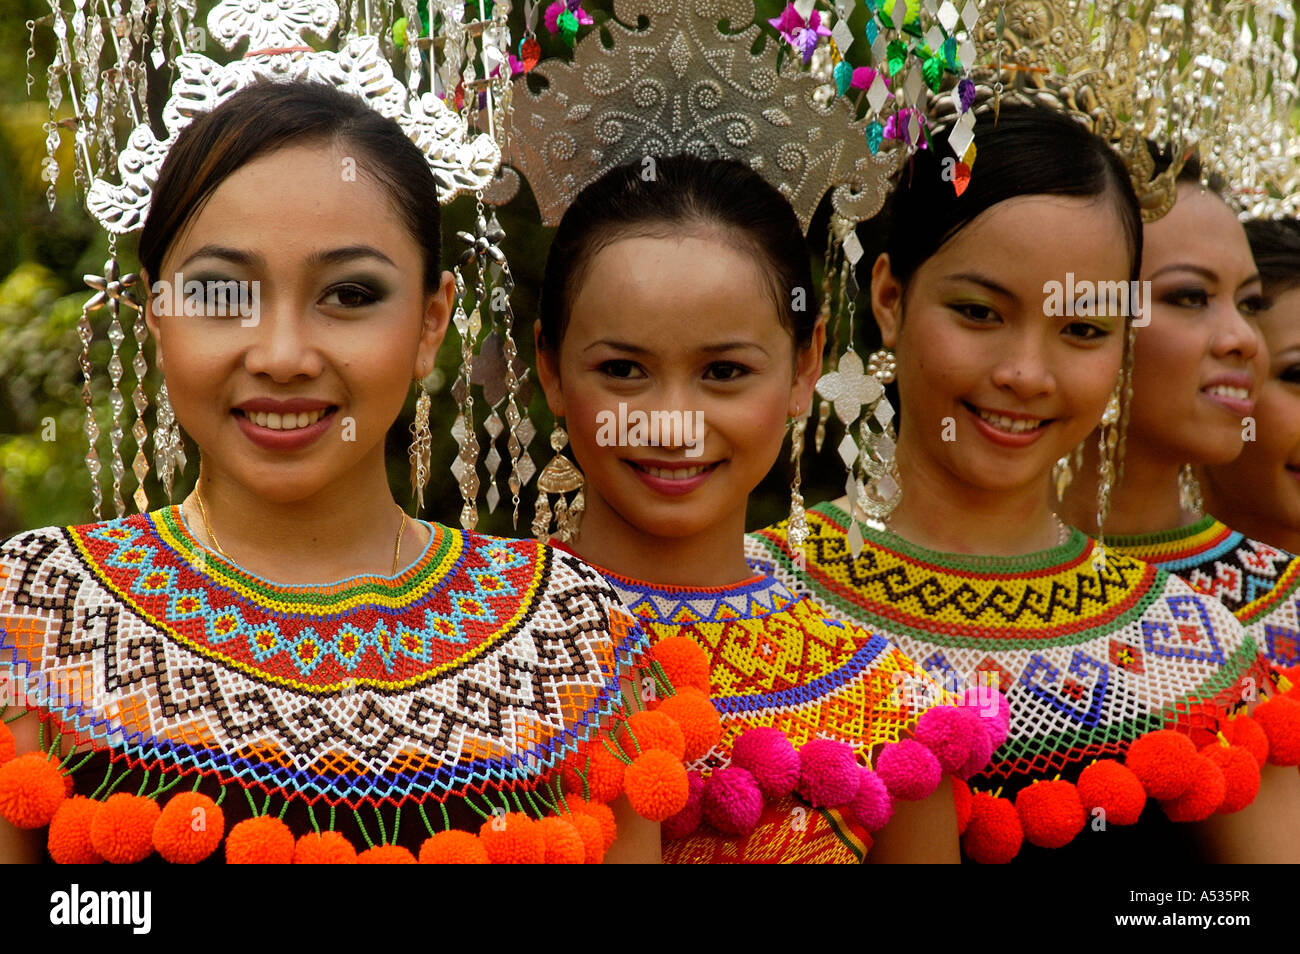 Young ladies in Iban traditional costume Kuching Malaysia 2006 No ...